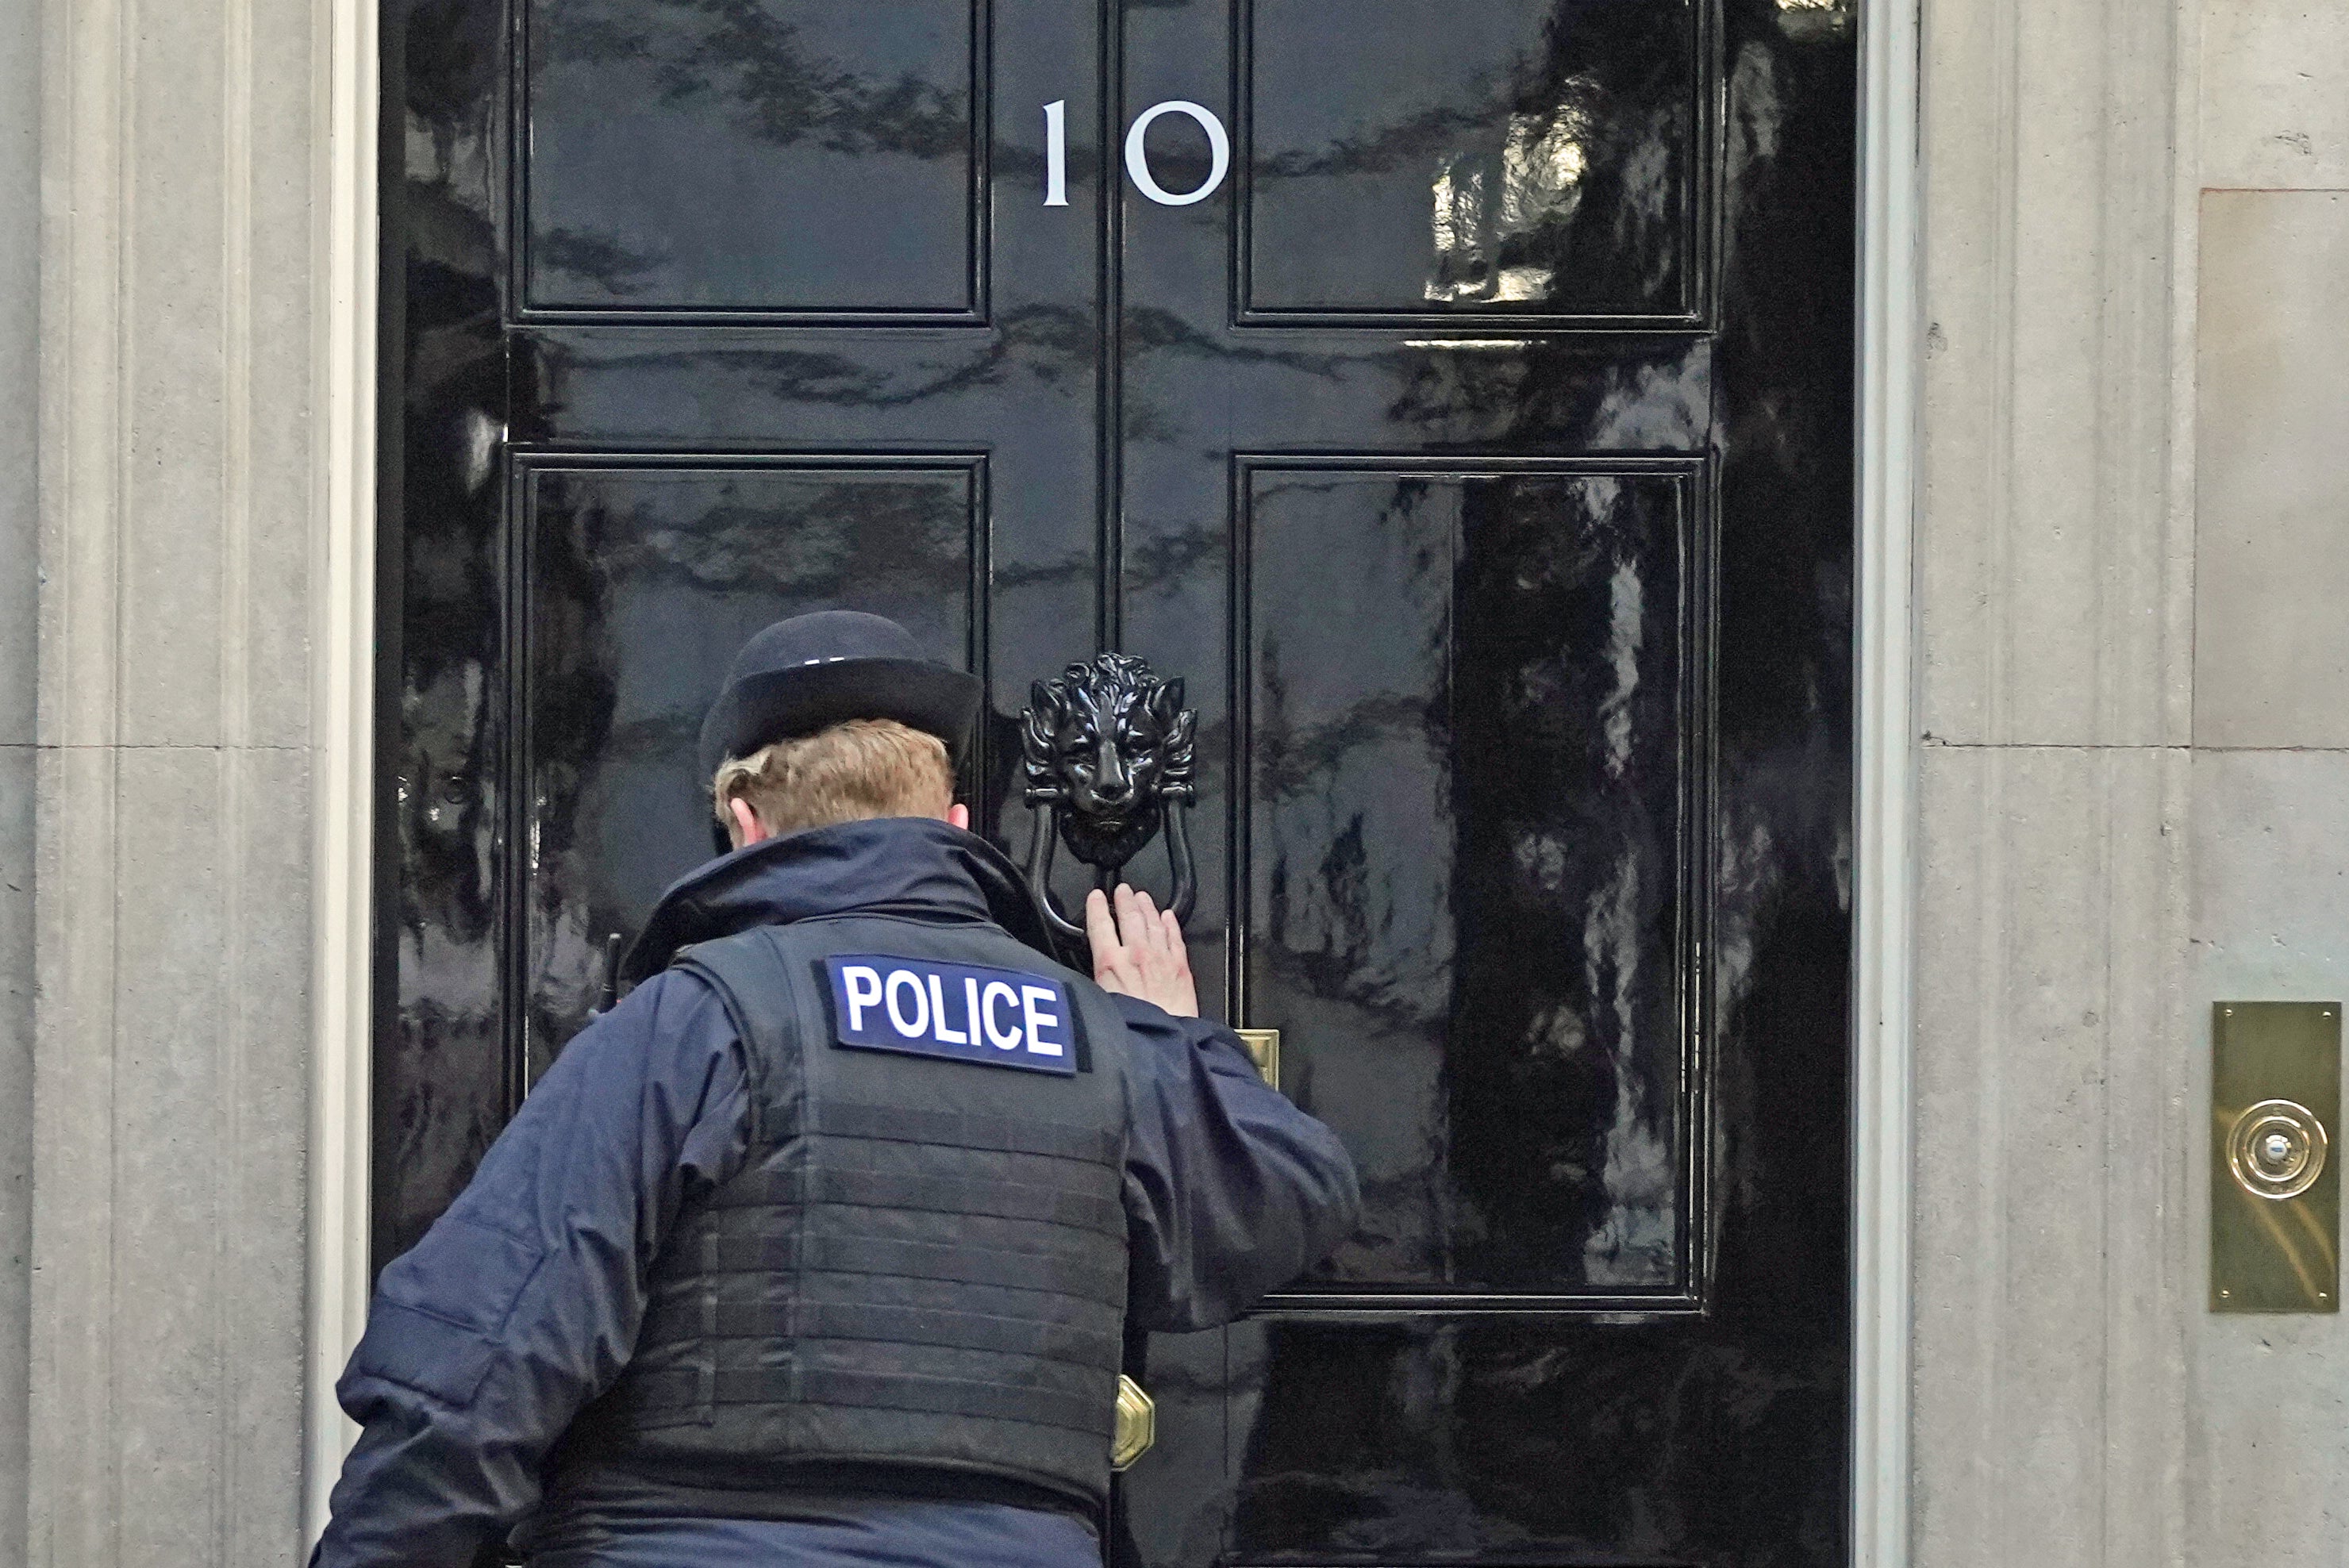 A police officer knocks on the door of the Prime Minister’s official residence in Downing Street, as public anger continues following the leak on Monday of an email from Boris Johnson’s principal private secretary, Martin Reynolds, inviting 100 Downing Street staff to a “bring your own booze” party on May 20, 2020 (Stefan Roussea/PA)